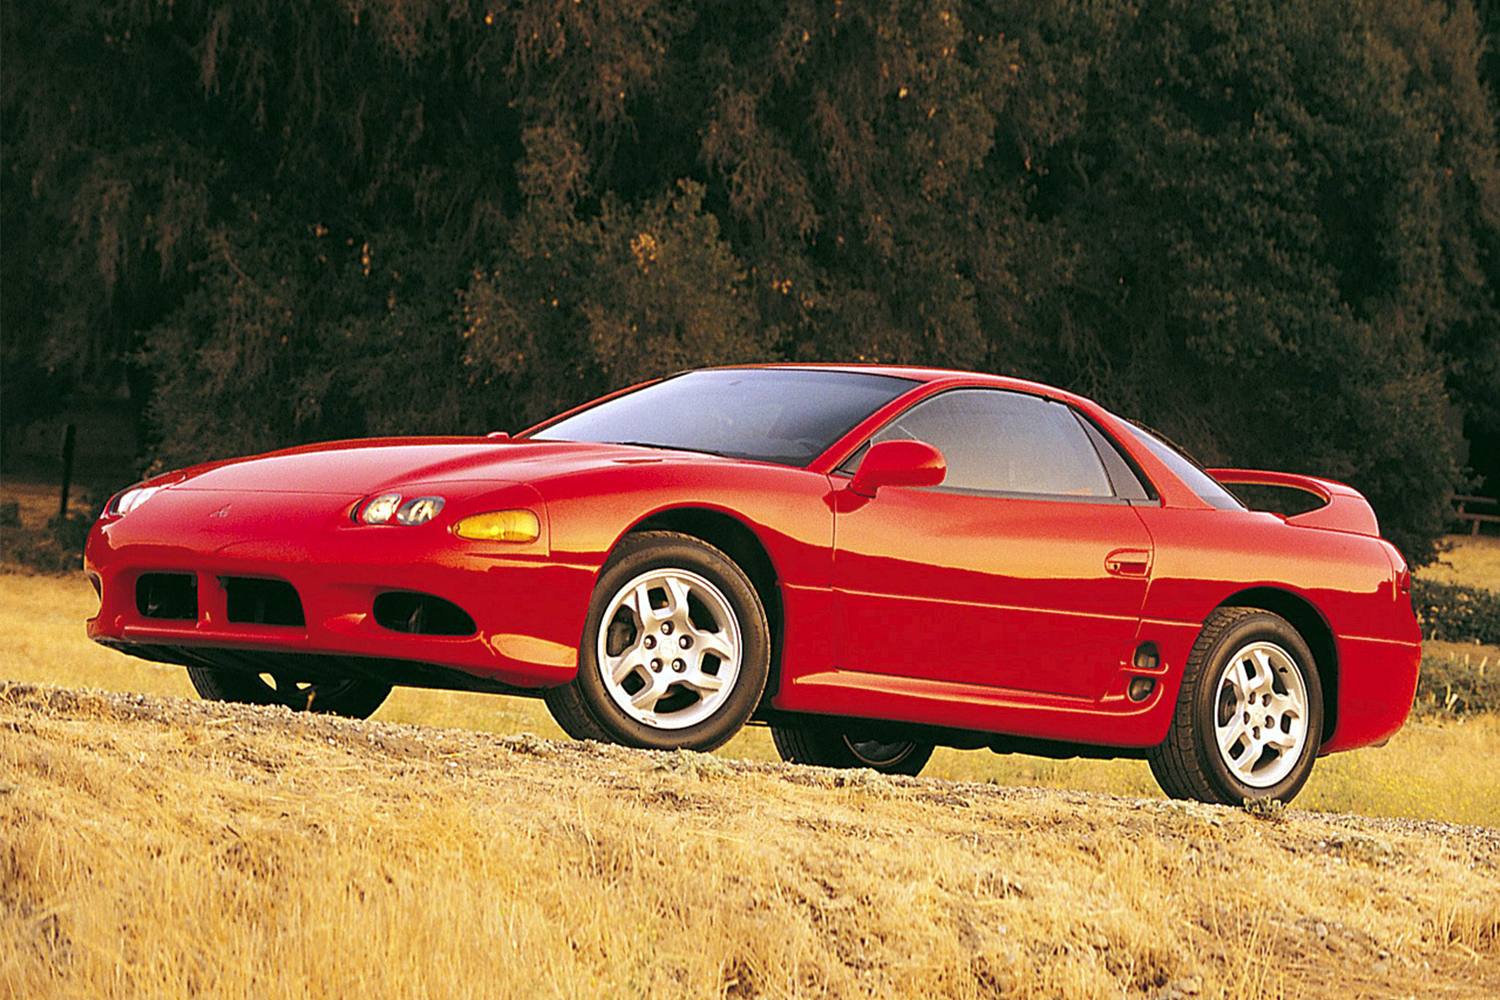 A 1993 Mitsubishi 3000GT in red